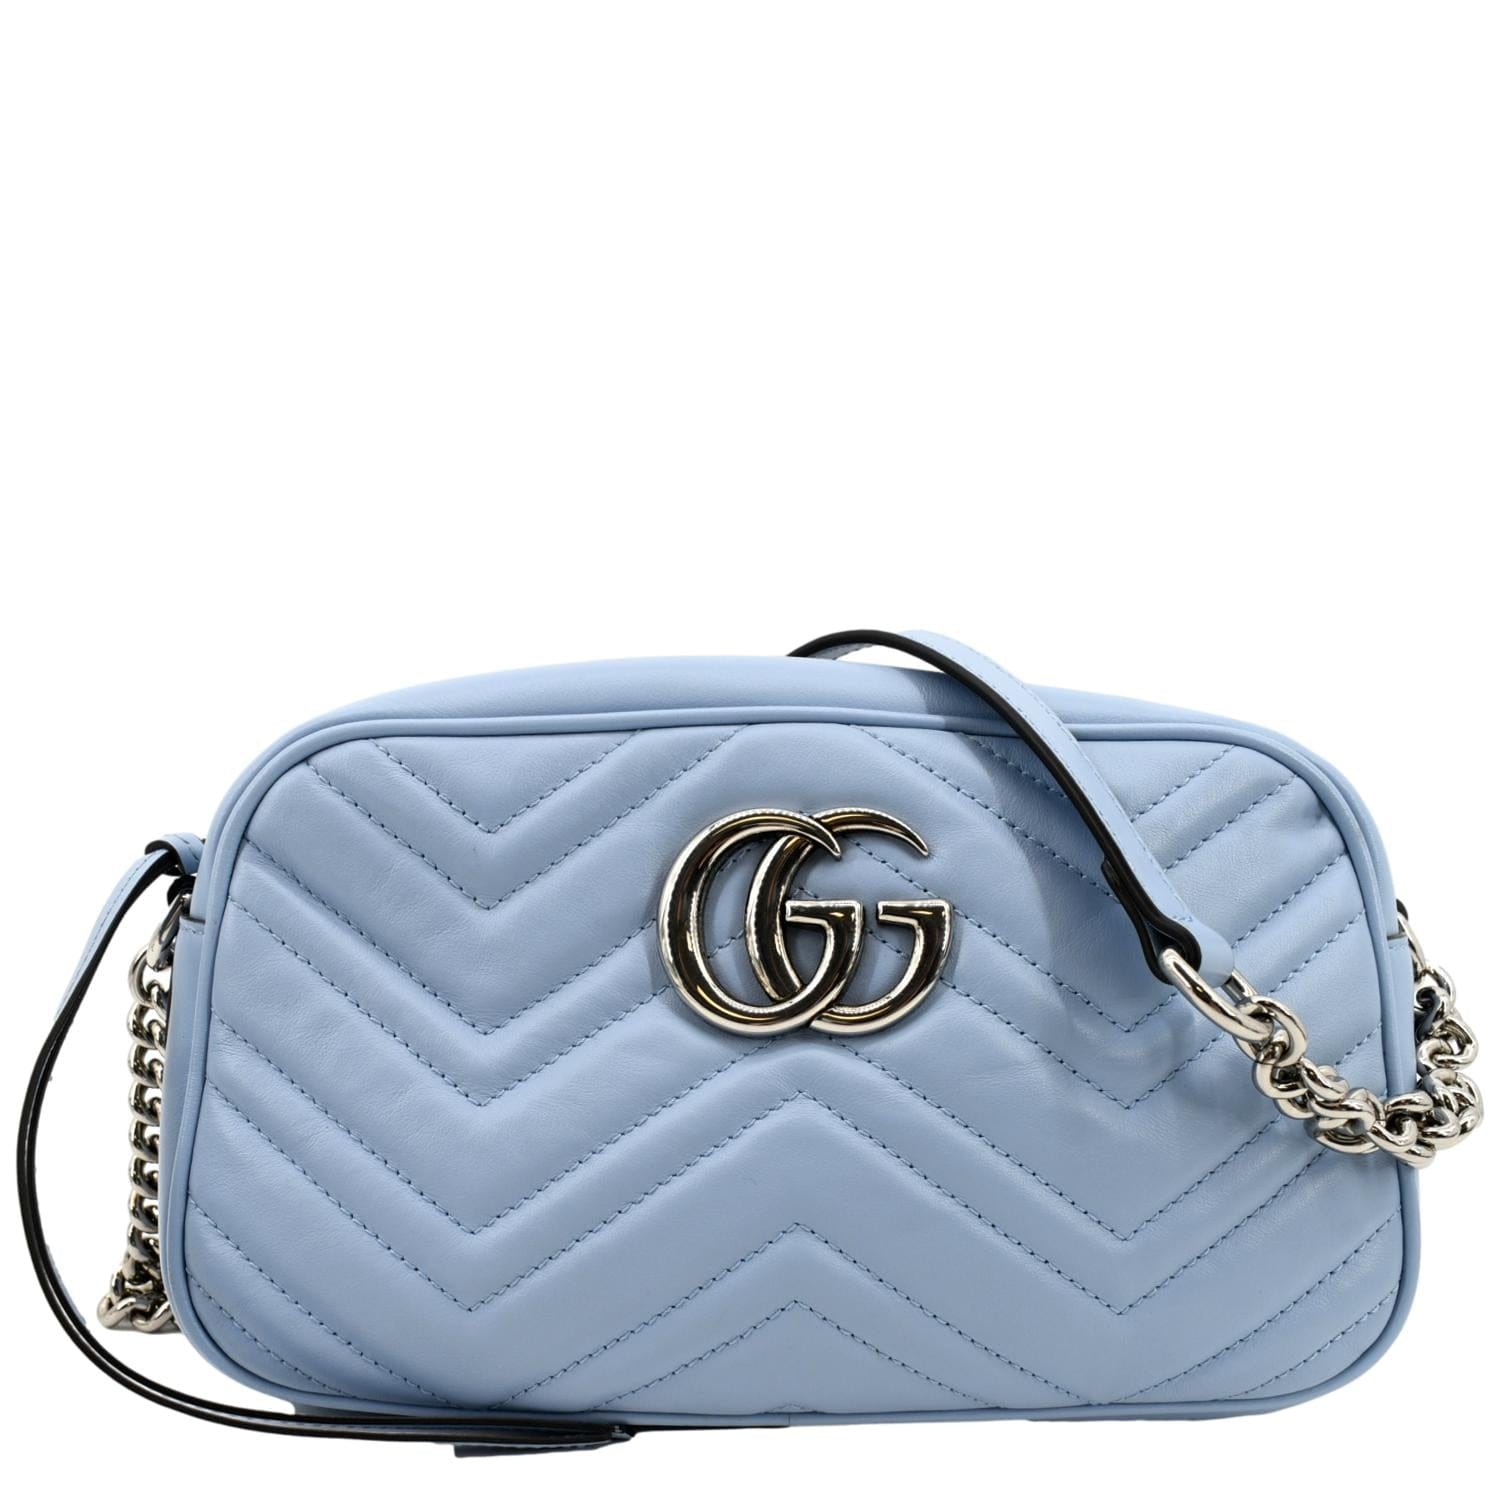 Gucci Marmont Shoulder Bag GG Small Pastel Blue in Matelasse